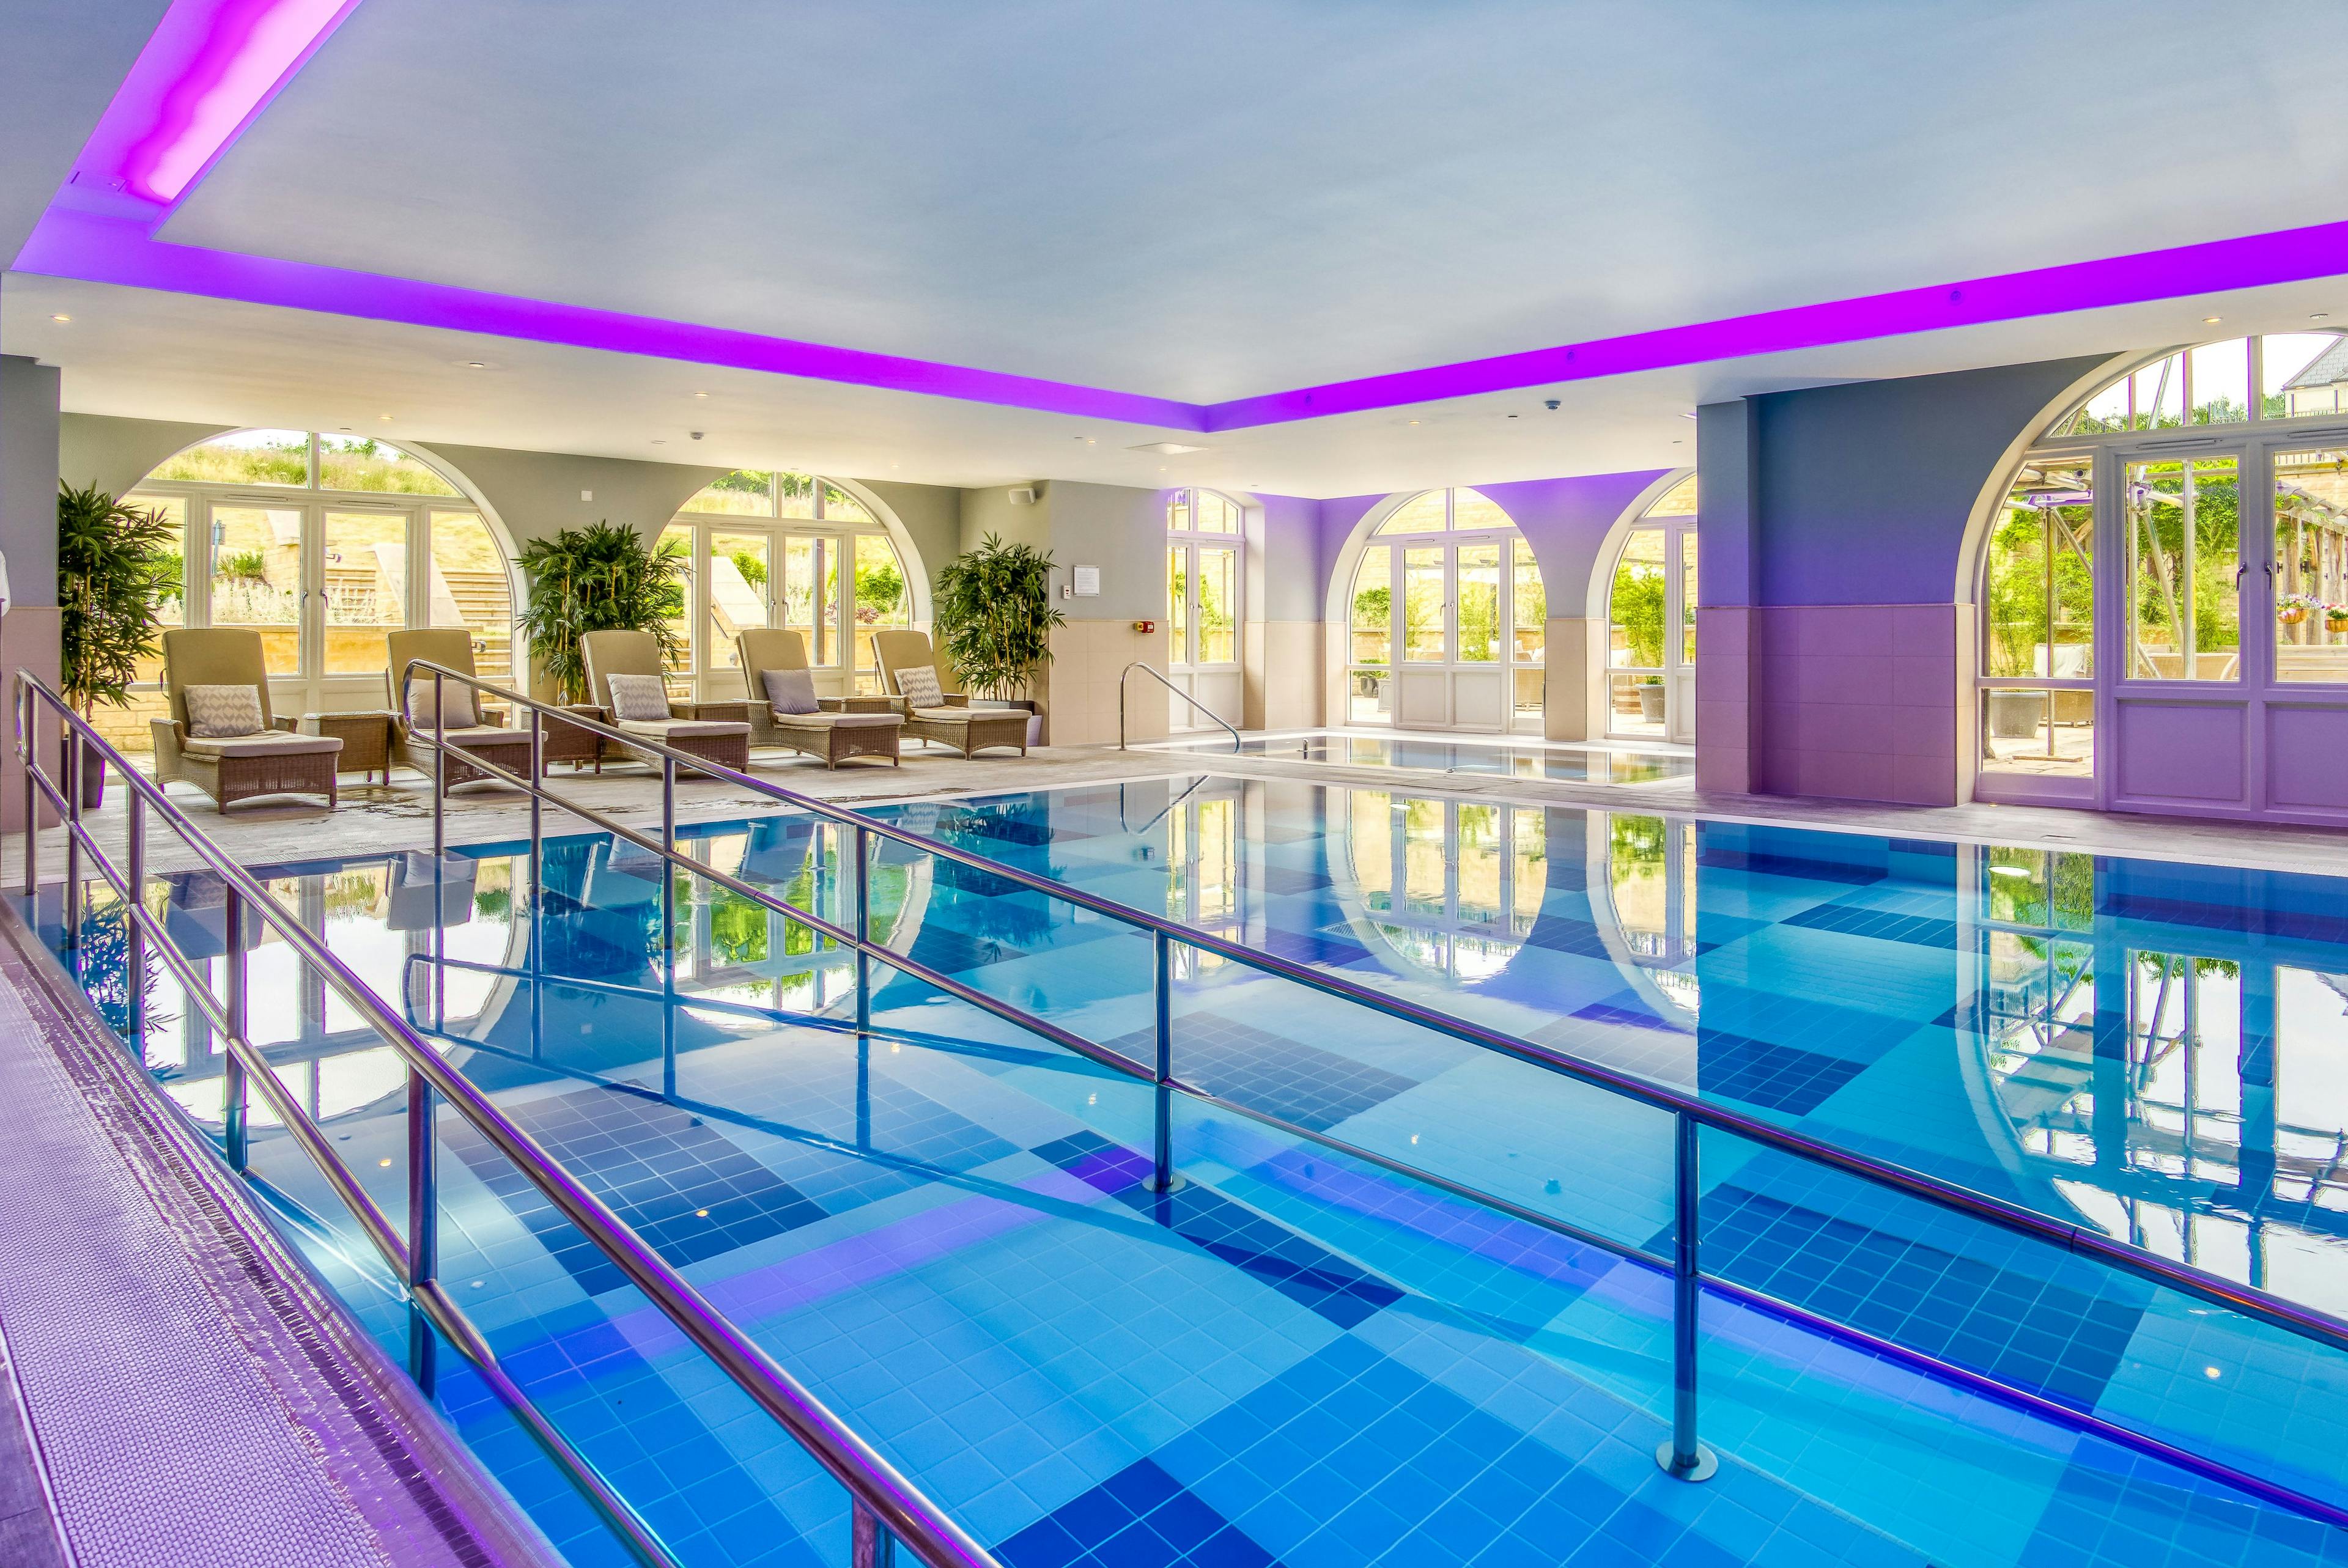 Swimming pool of Witney care home in Witney, Oxfordshire